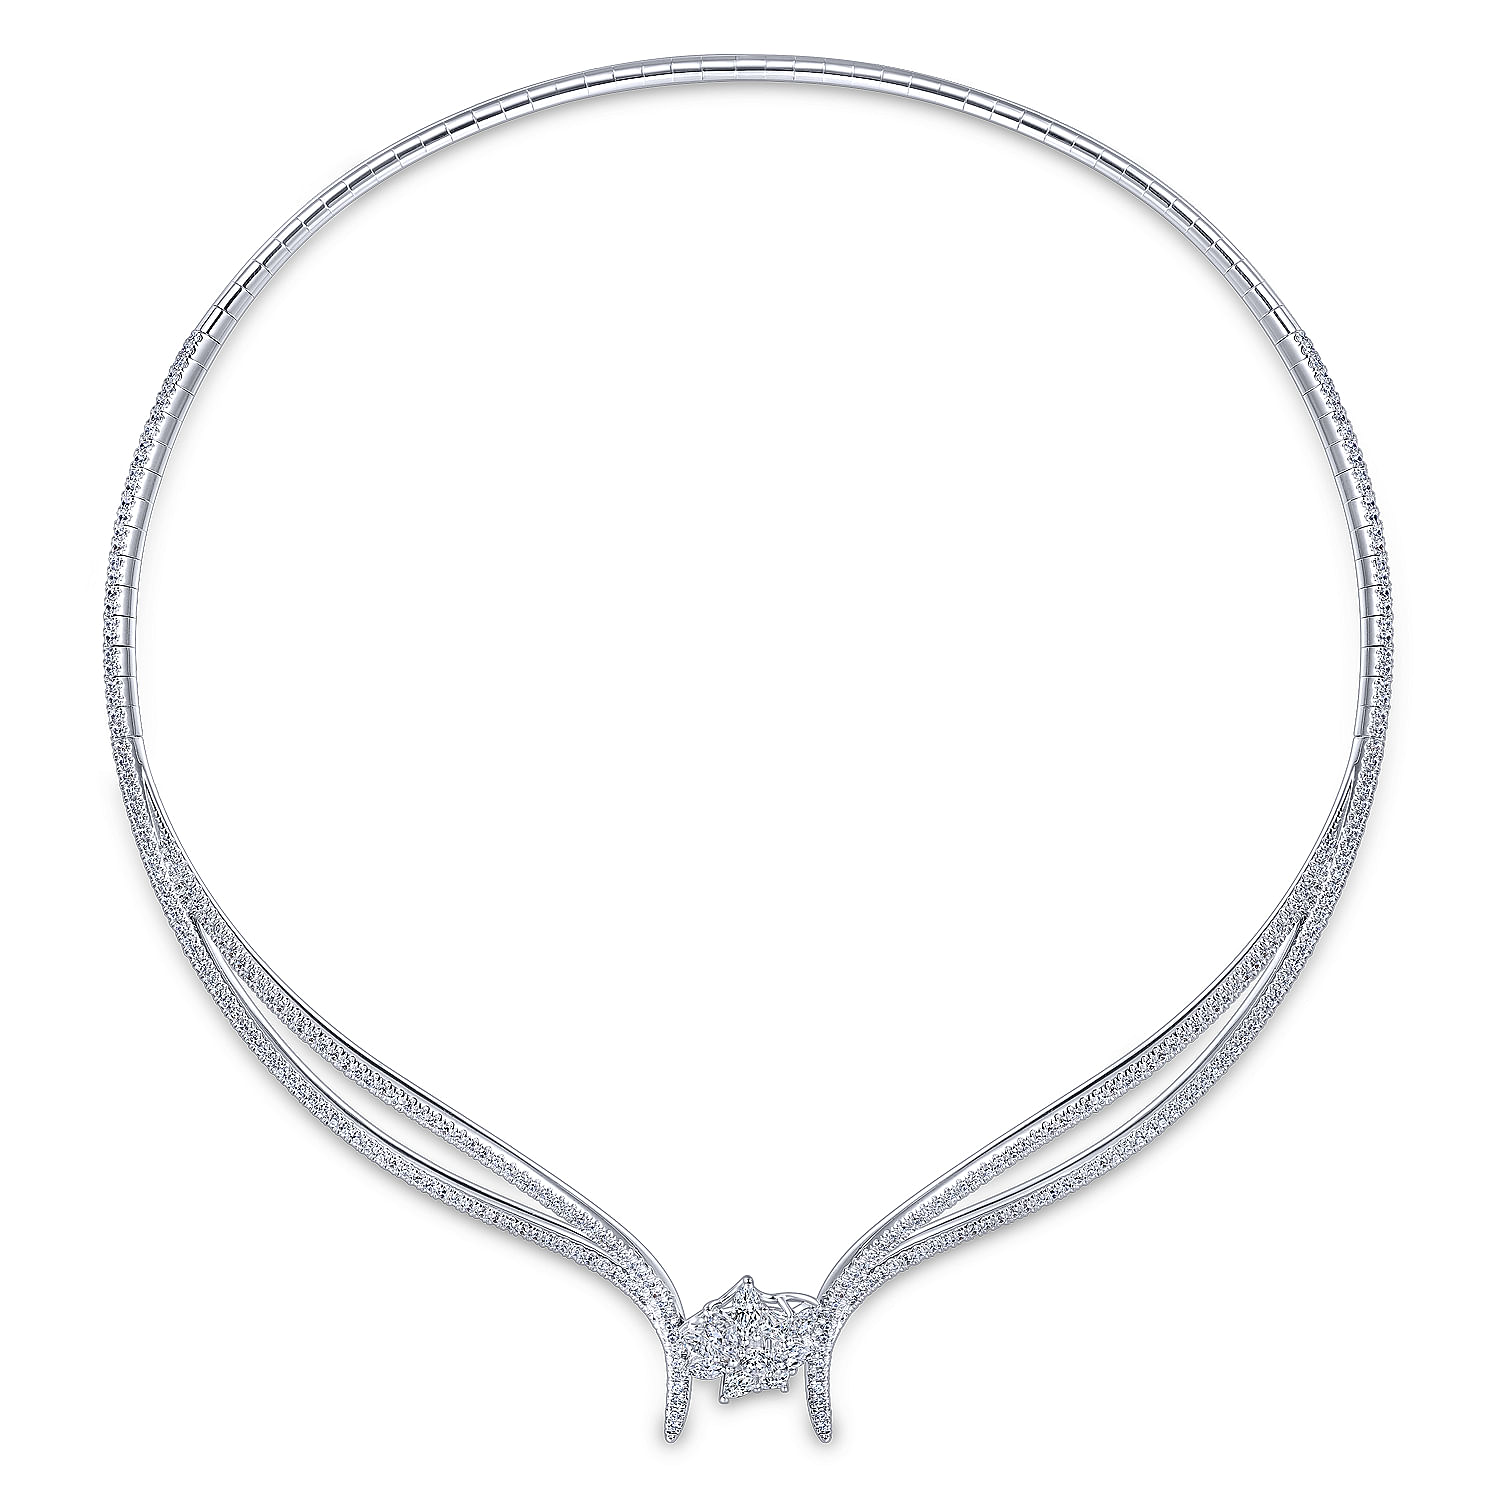 18K White Gold Diamond Choker Necklace with Floral Center